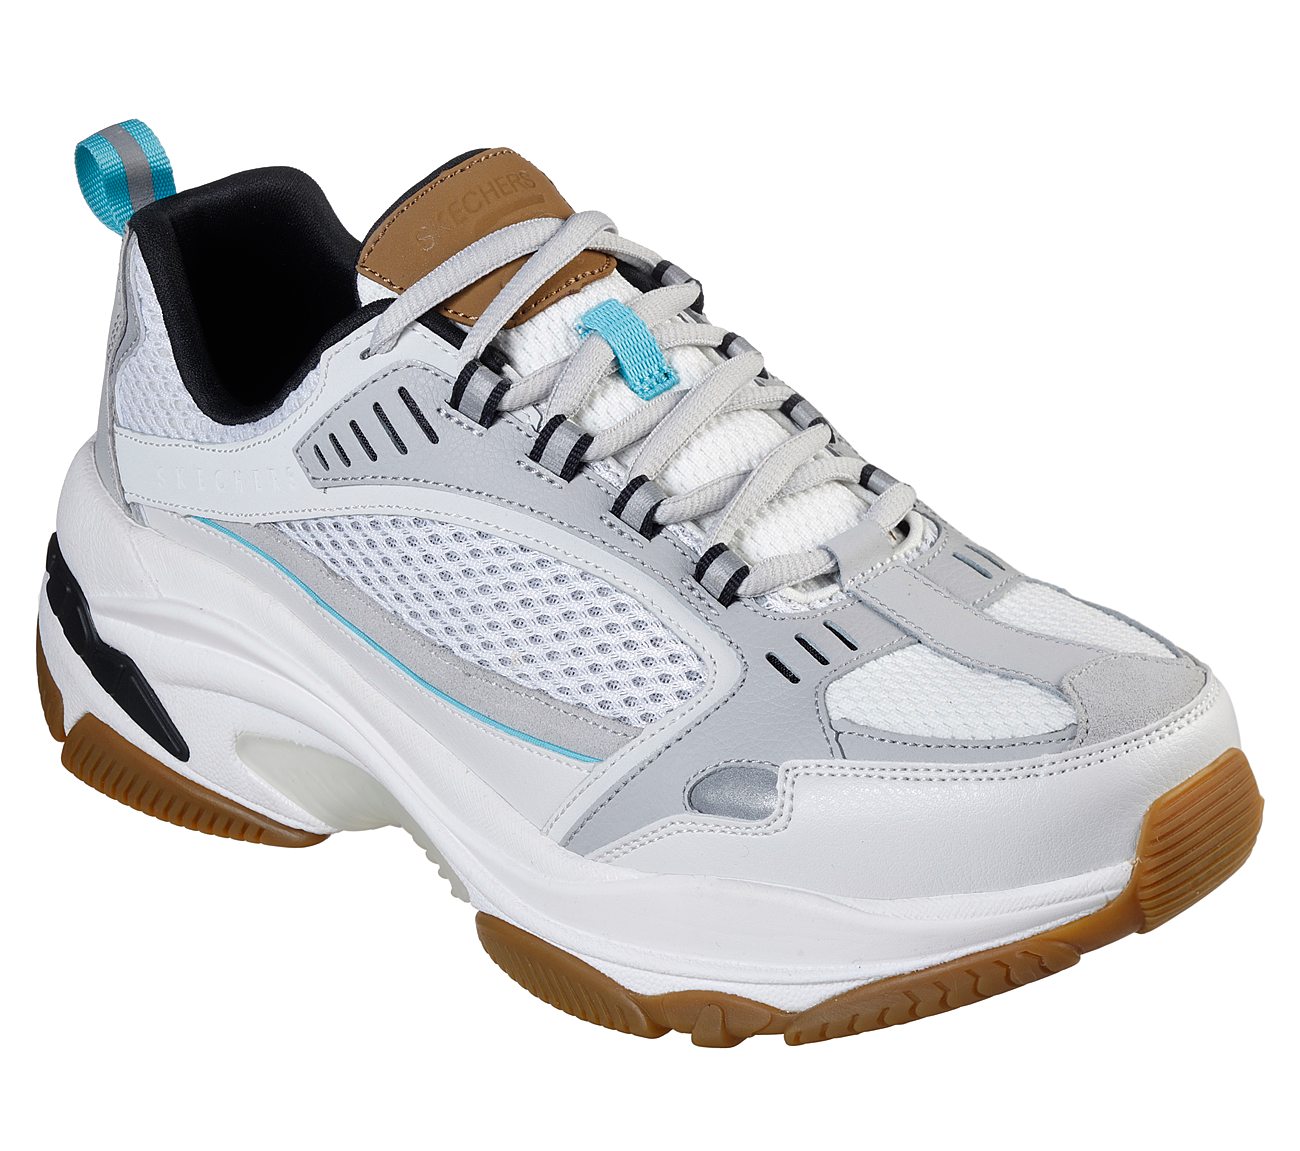 skechers leather textile upper